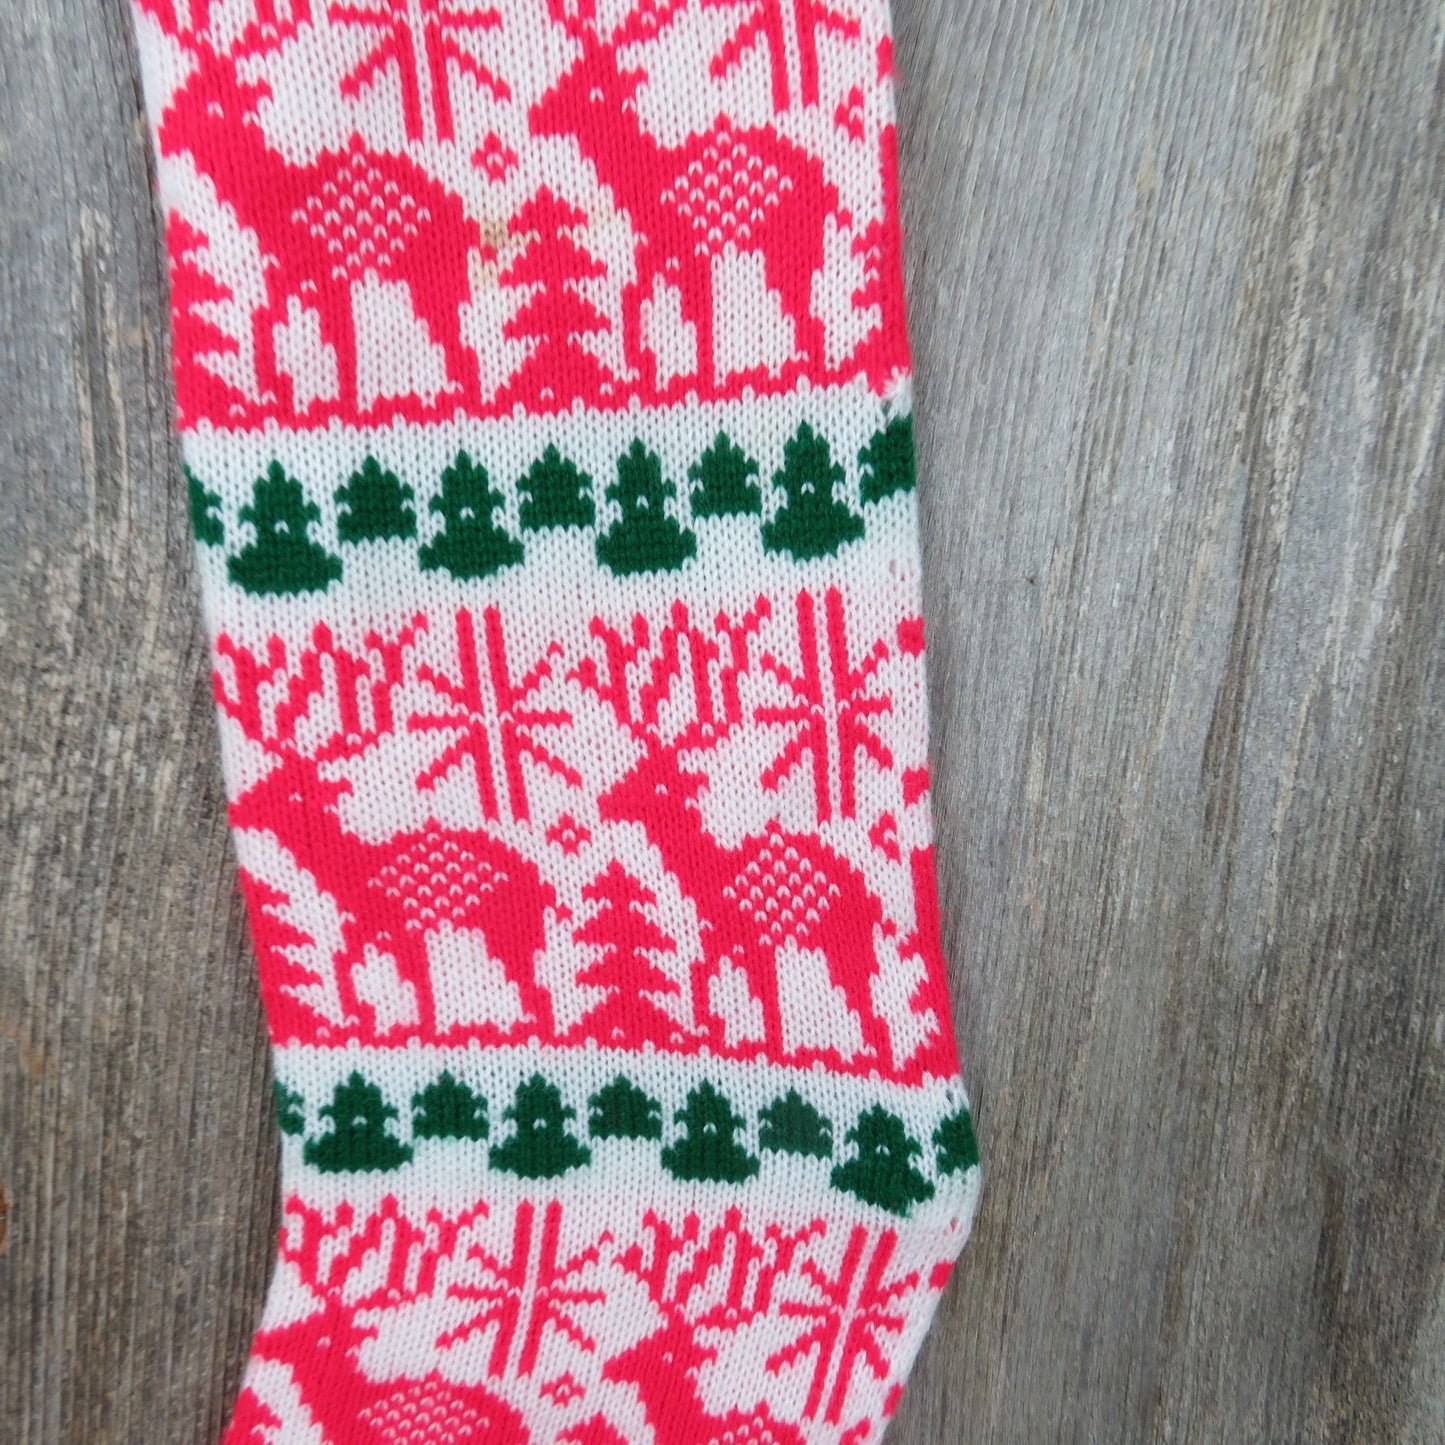 Reindeer Knit Christmas Stocking Knitted White Red Green 1980s Vintage Extra Long